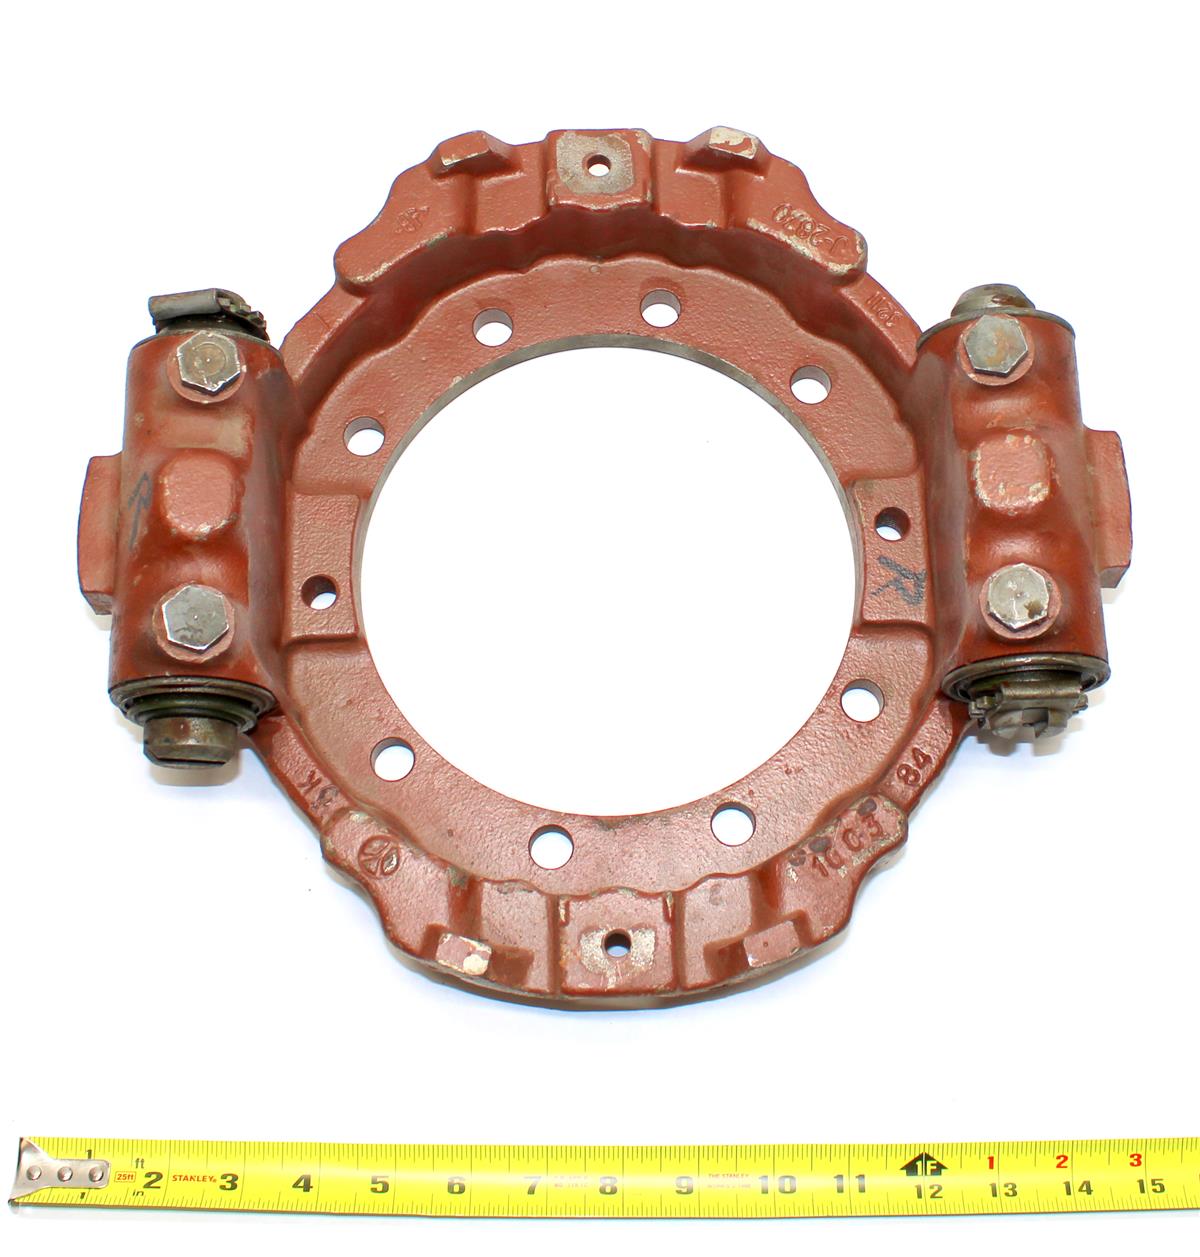 9M-1063 | 9M-1063 Right Side Rear Spider Brake Assembly M939A1 M939A2 (22).JPG